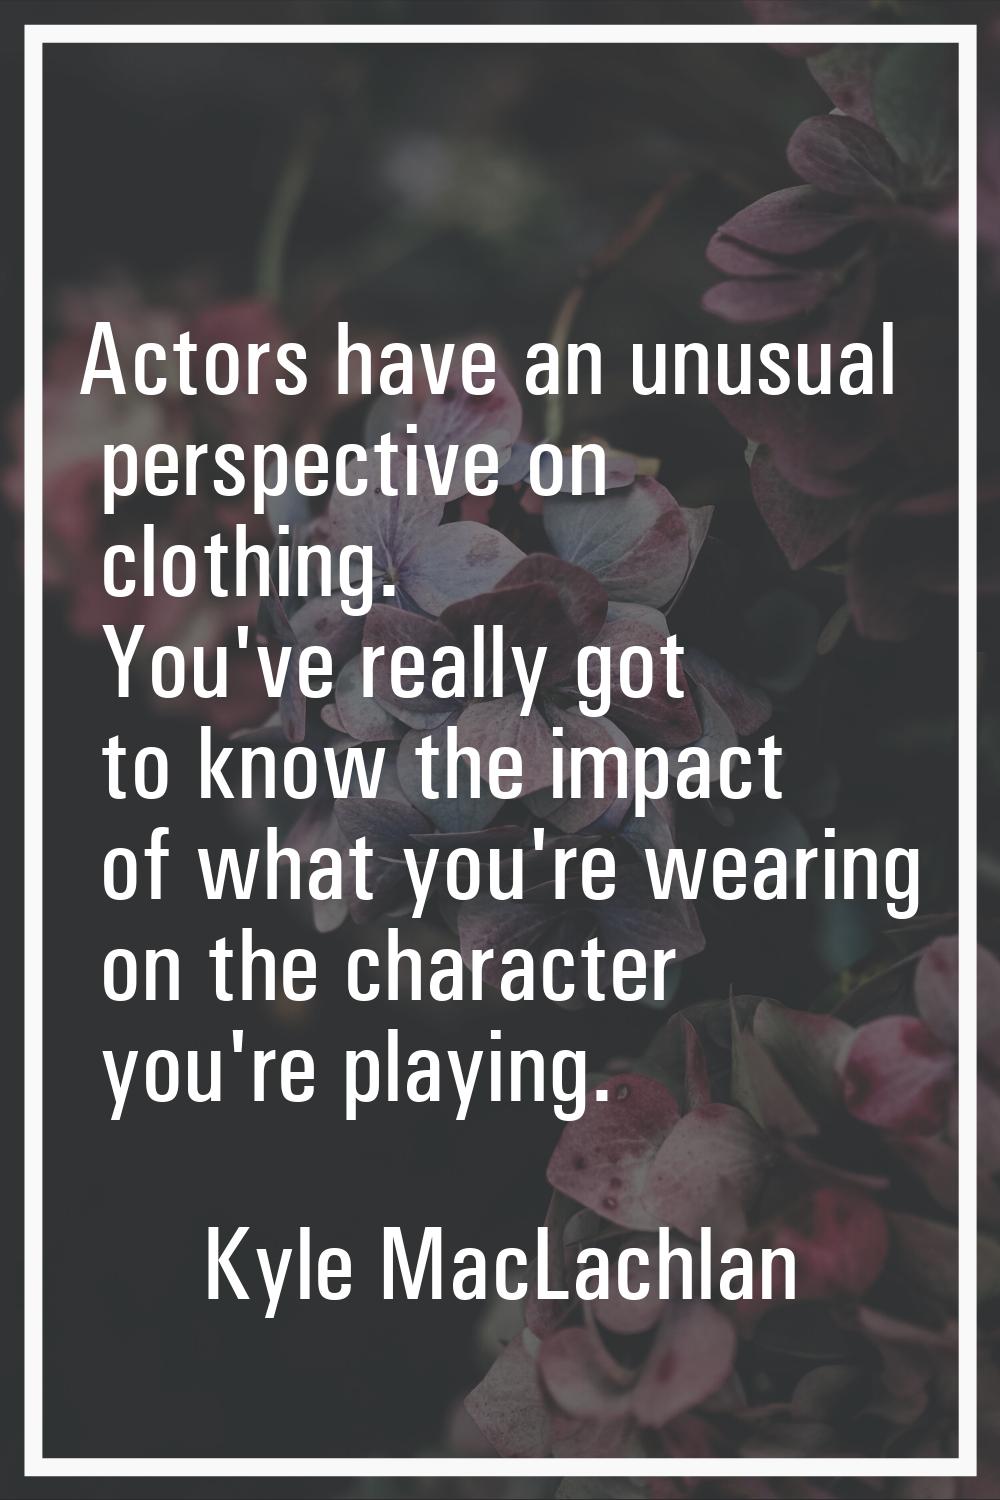 Actors have an unusual perspective on clothing. You've really got to know the impact of what you're